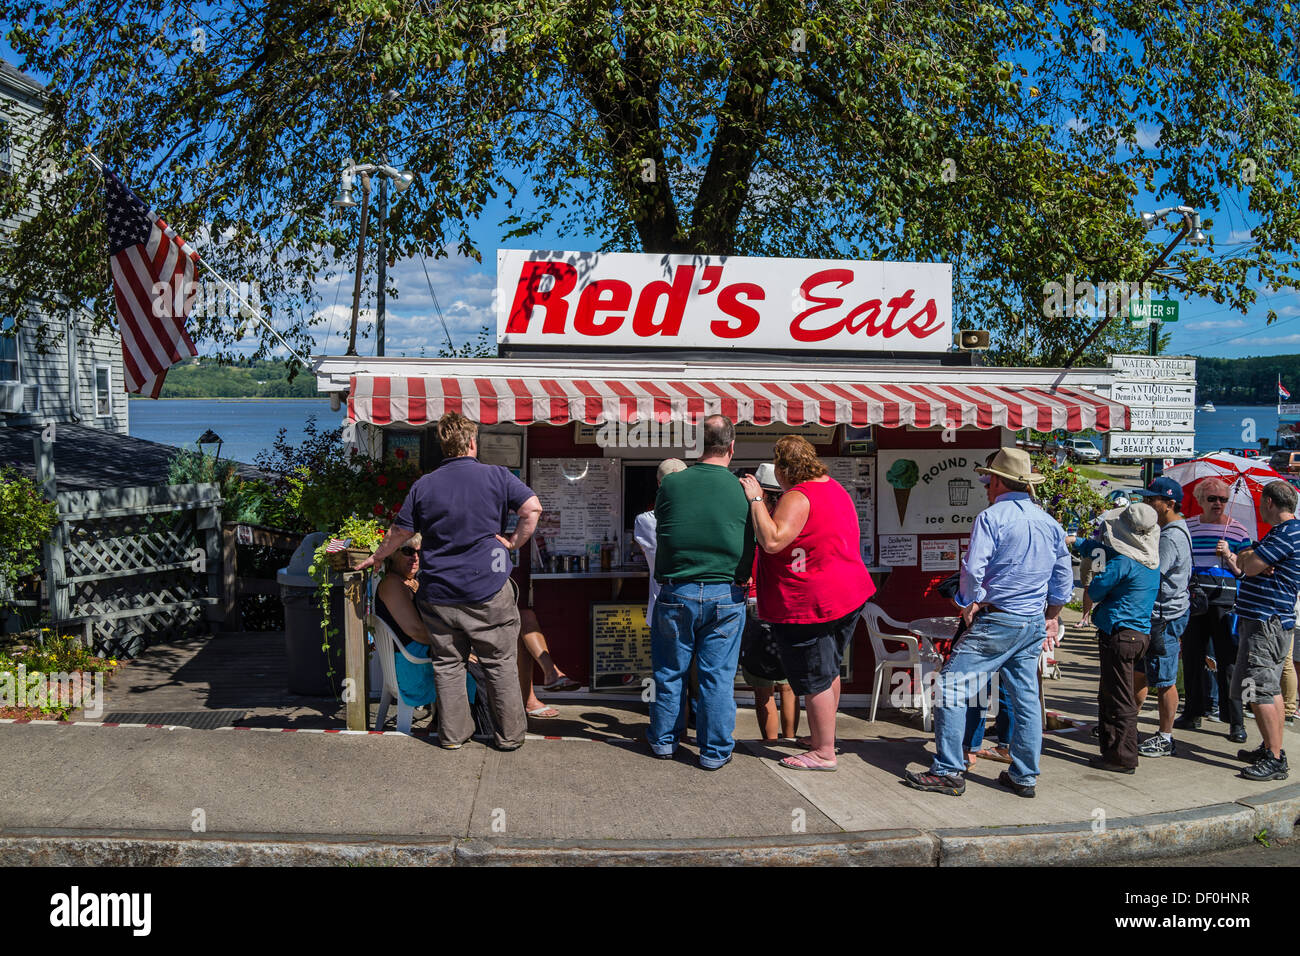 Red's Eats a small roadside restaurant in Wiscasset, Maine renowned for their lobster rolls. Stock Photo